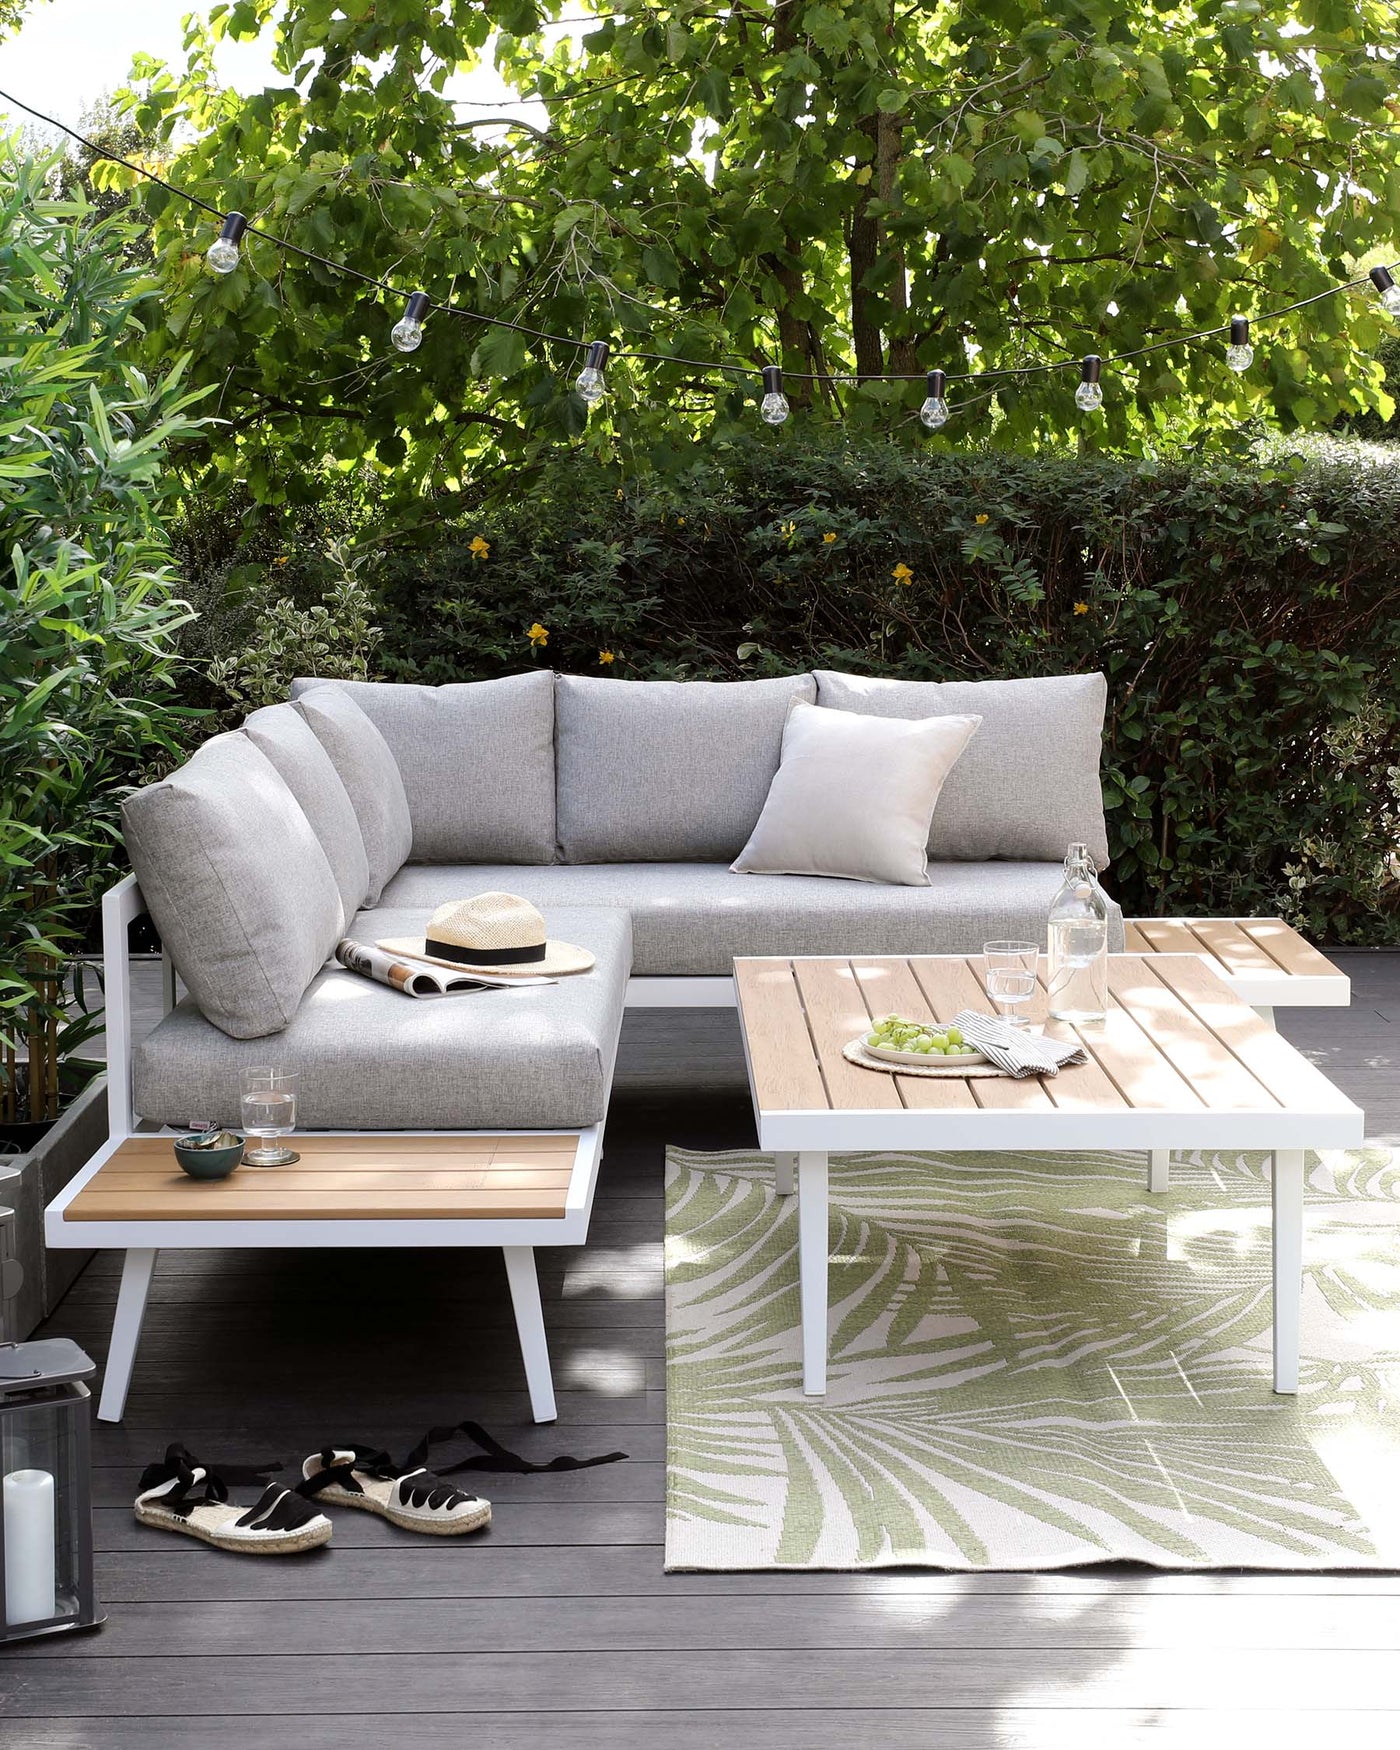 Outdoor furniture set including a light grey upholstered corner sectional sofa with matching cushions, a rectangular wooden coffee table with a white frame, and a matching side table with partially visible wooden slats on top. The set is complemented by a patterned area rug underneath the coffee table. The furniture arrangement is on a wooden deck, surrounded by lush greenery and adorned with string lights overhead.